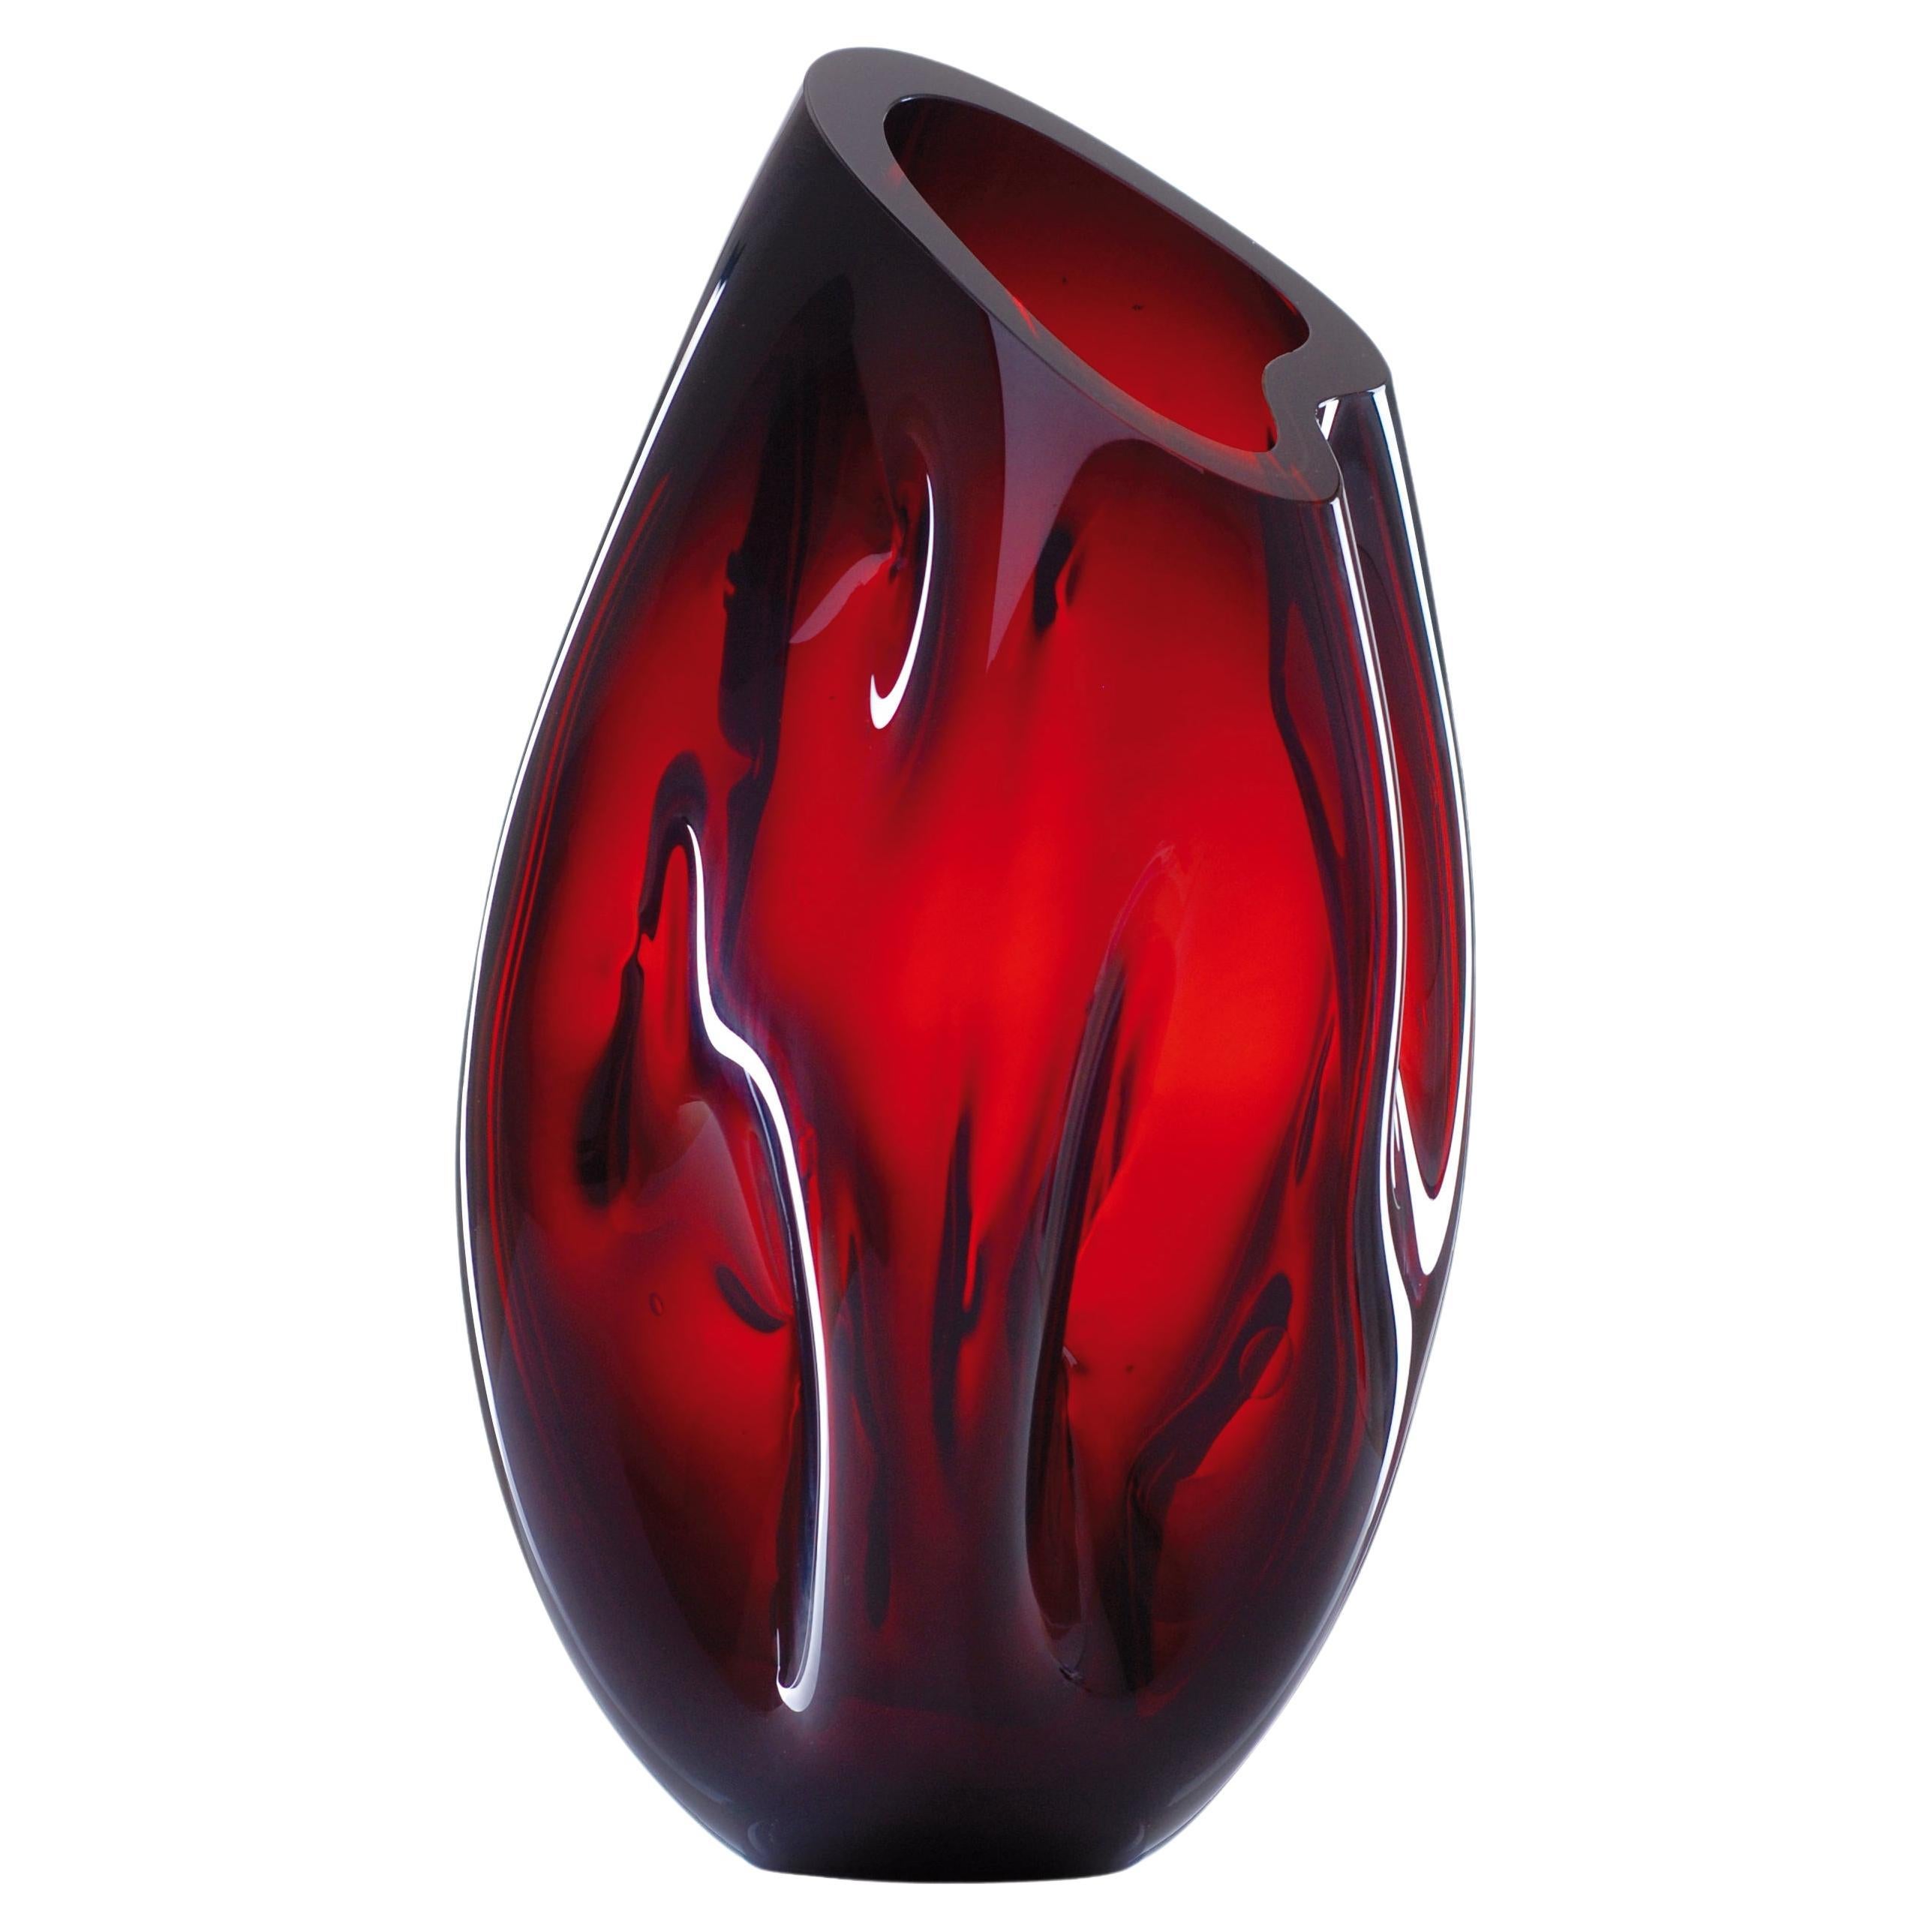 Magma Vase For Sale